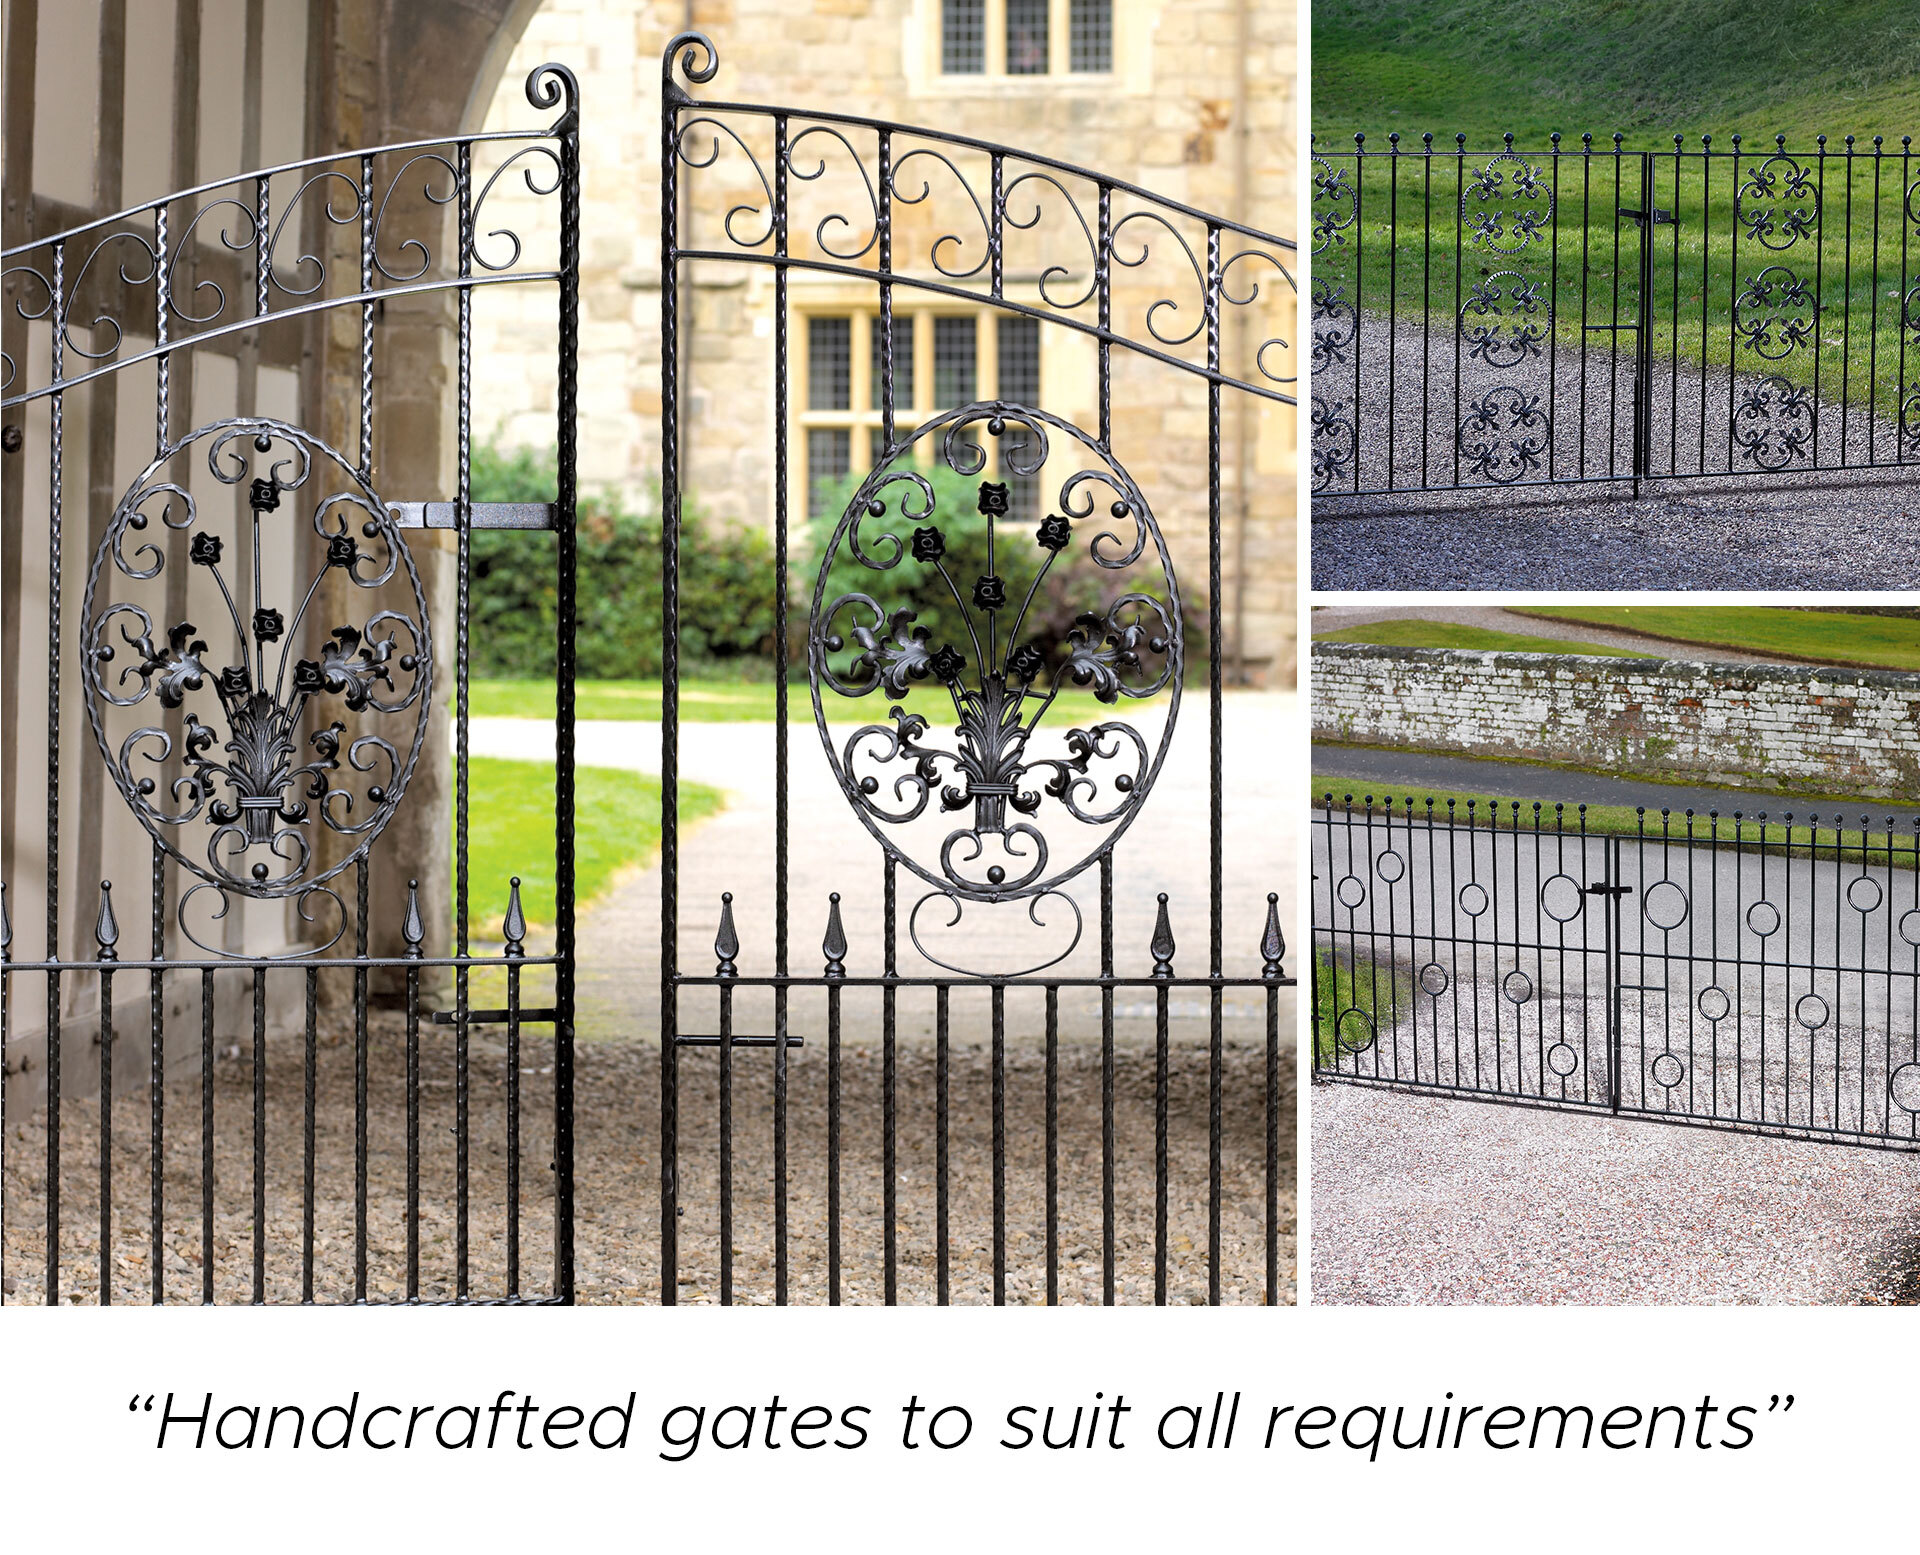 Handcrafted gates to suit your requirements